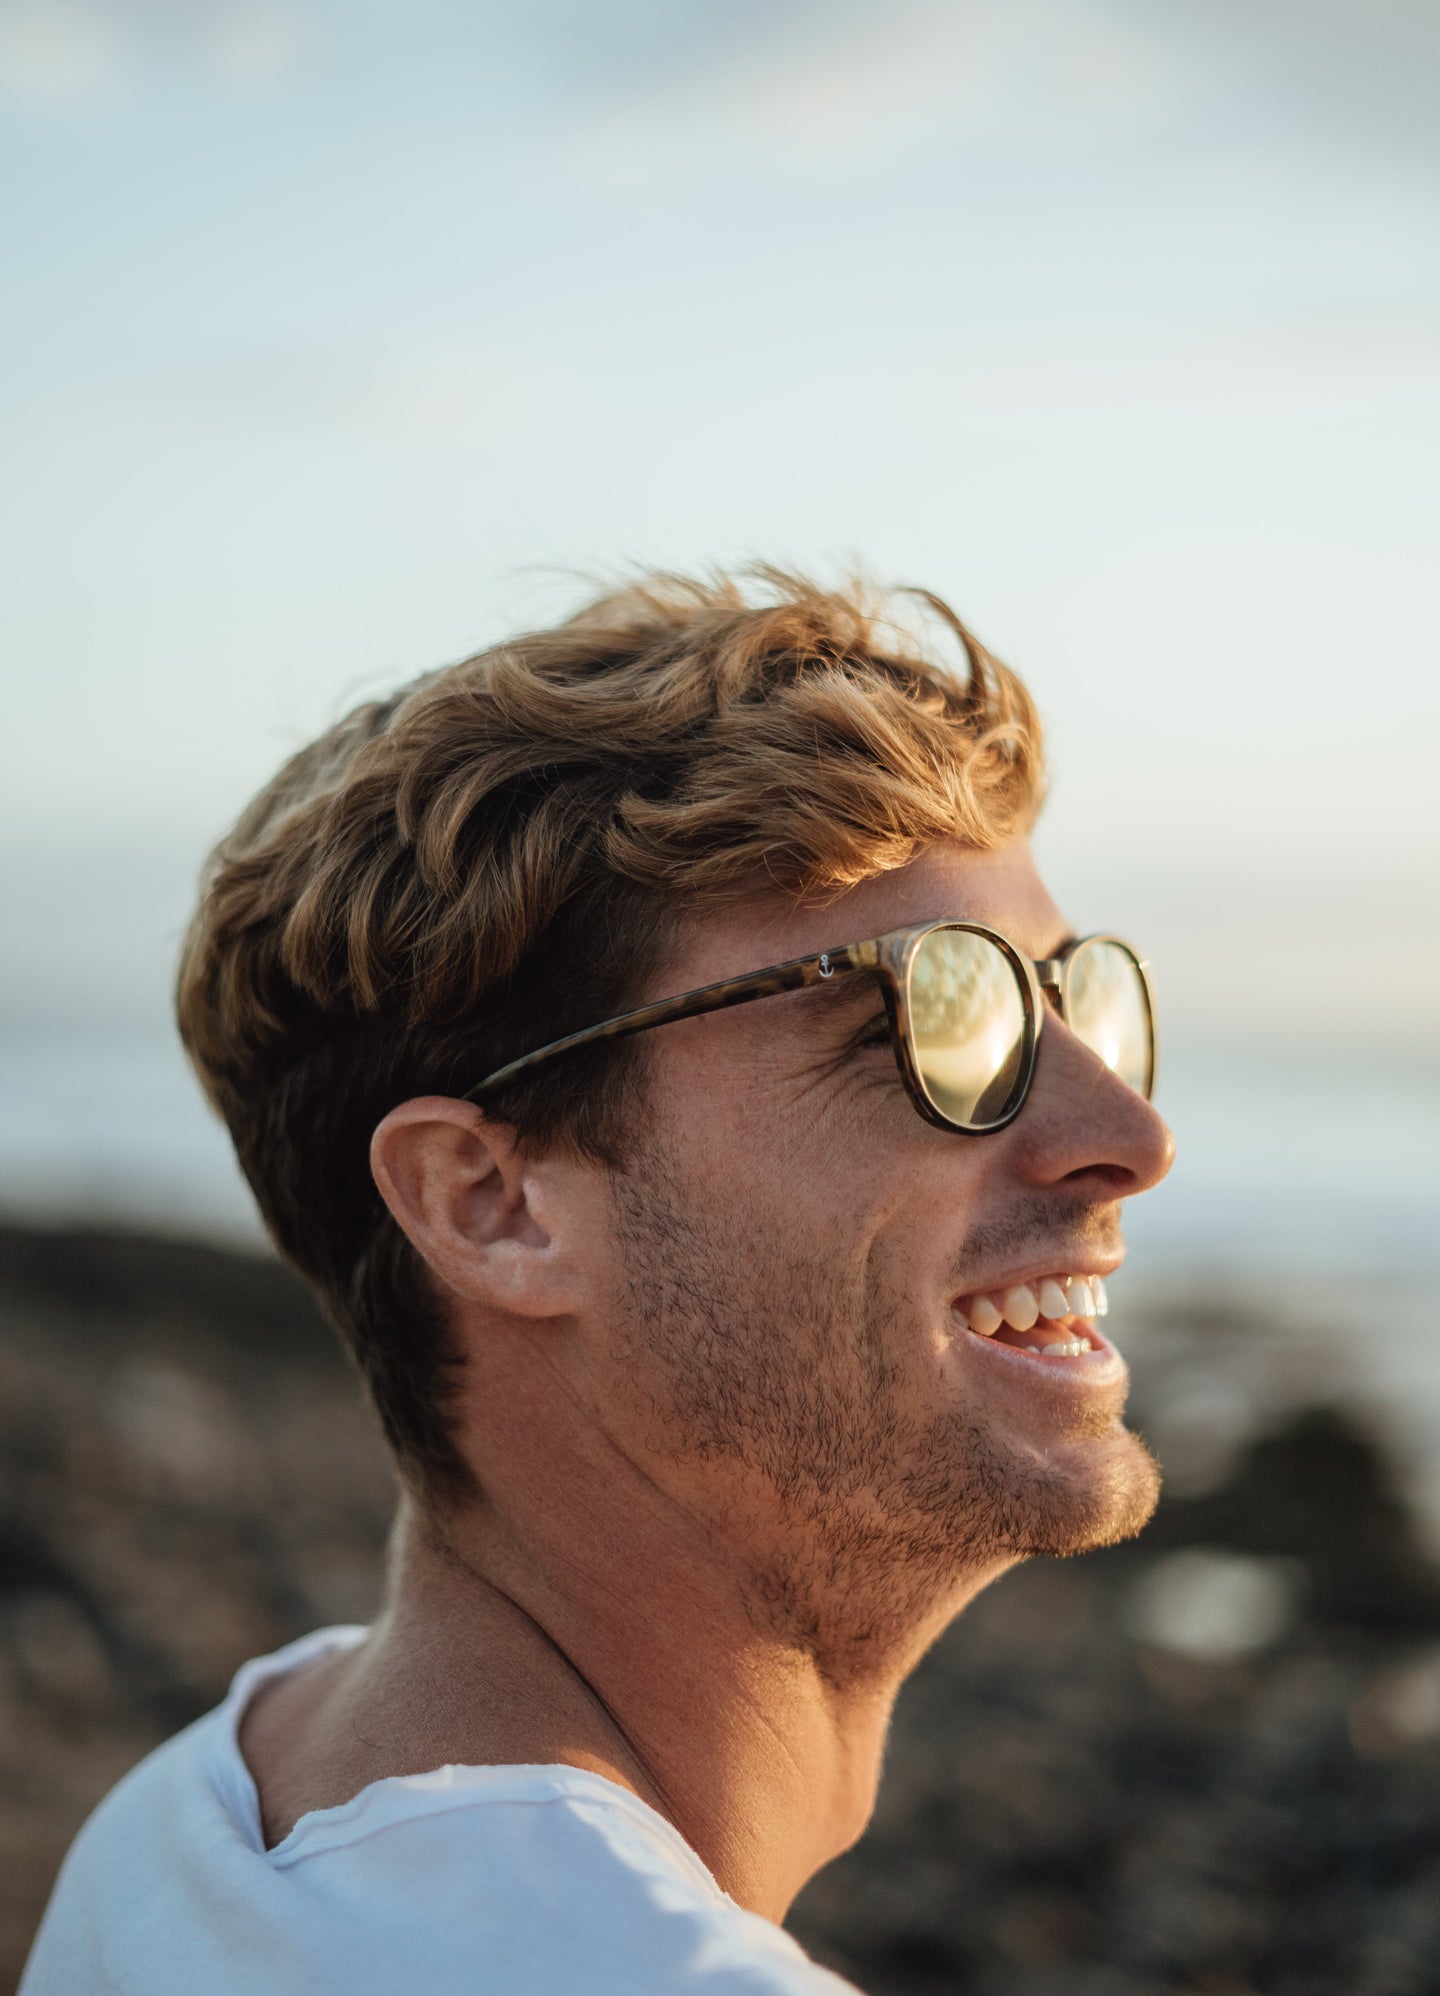 The Men Parafina sunglasses Collection offers an eco-friendly and sophisticated eyewear.